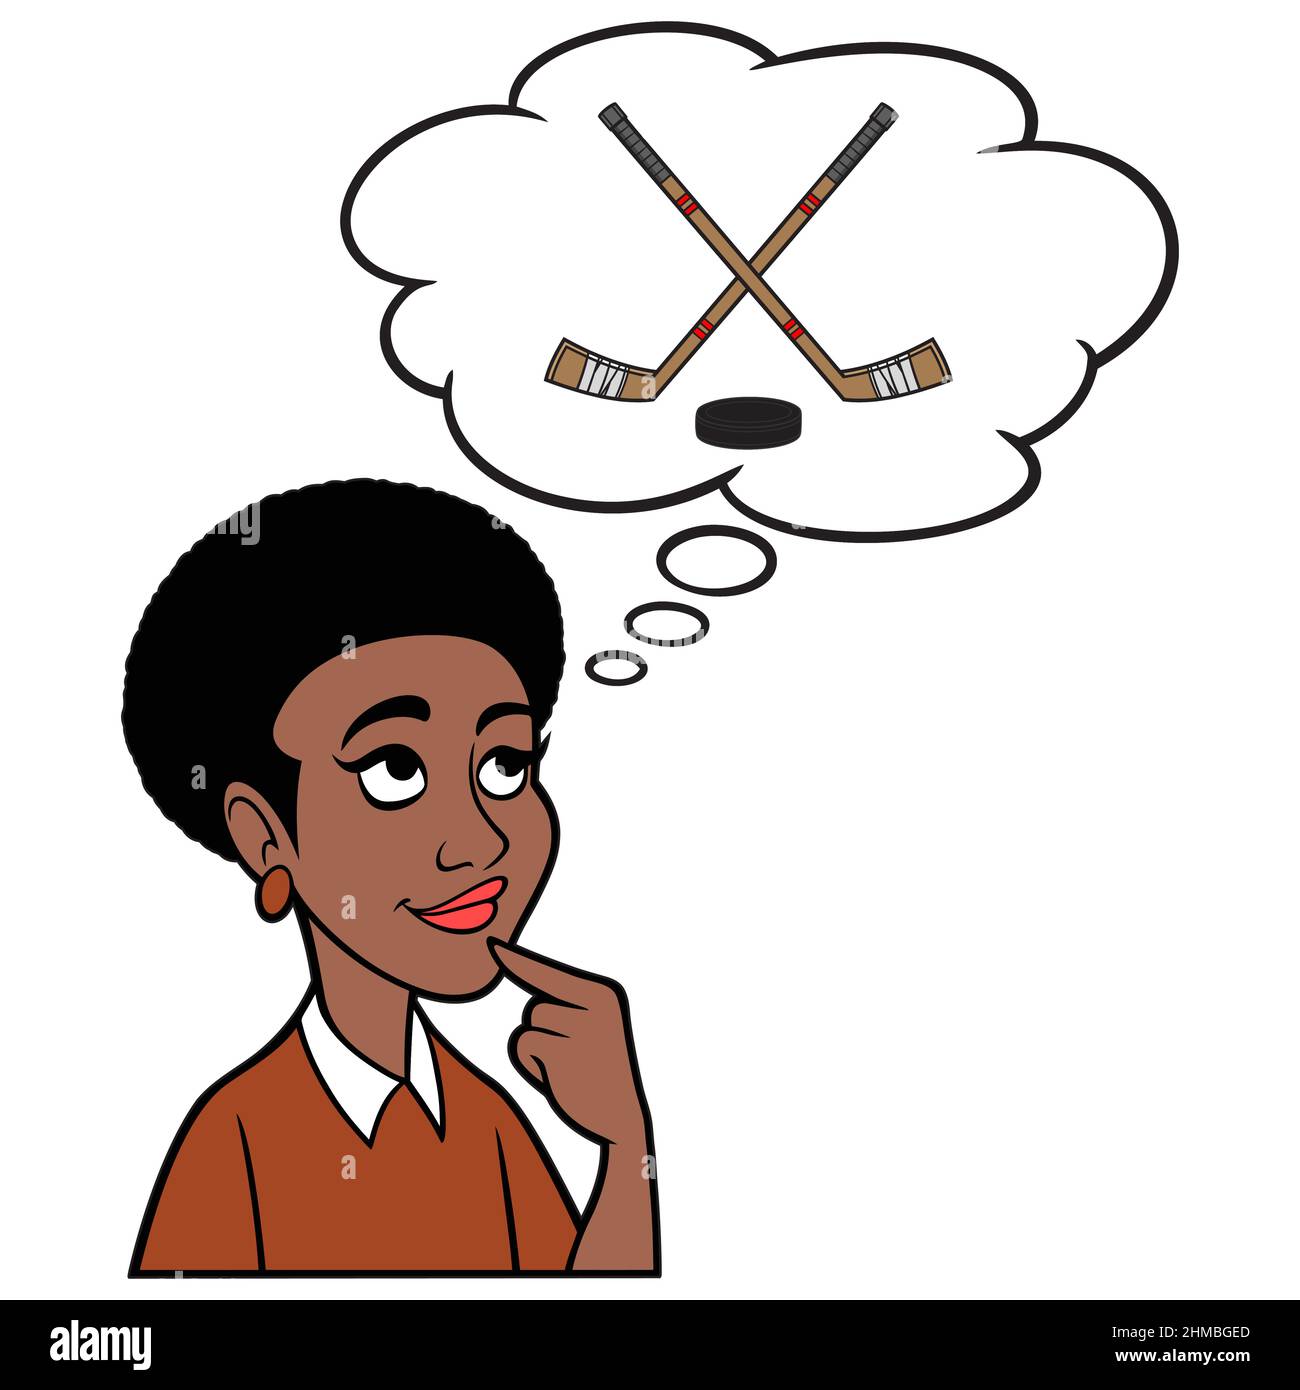 Black Woman Thinking a Hockey Game - Une illustration de dessin animé d'une Black Woman Thinking about Weekend Hockey Game. Illustration de Vecteur